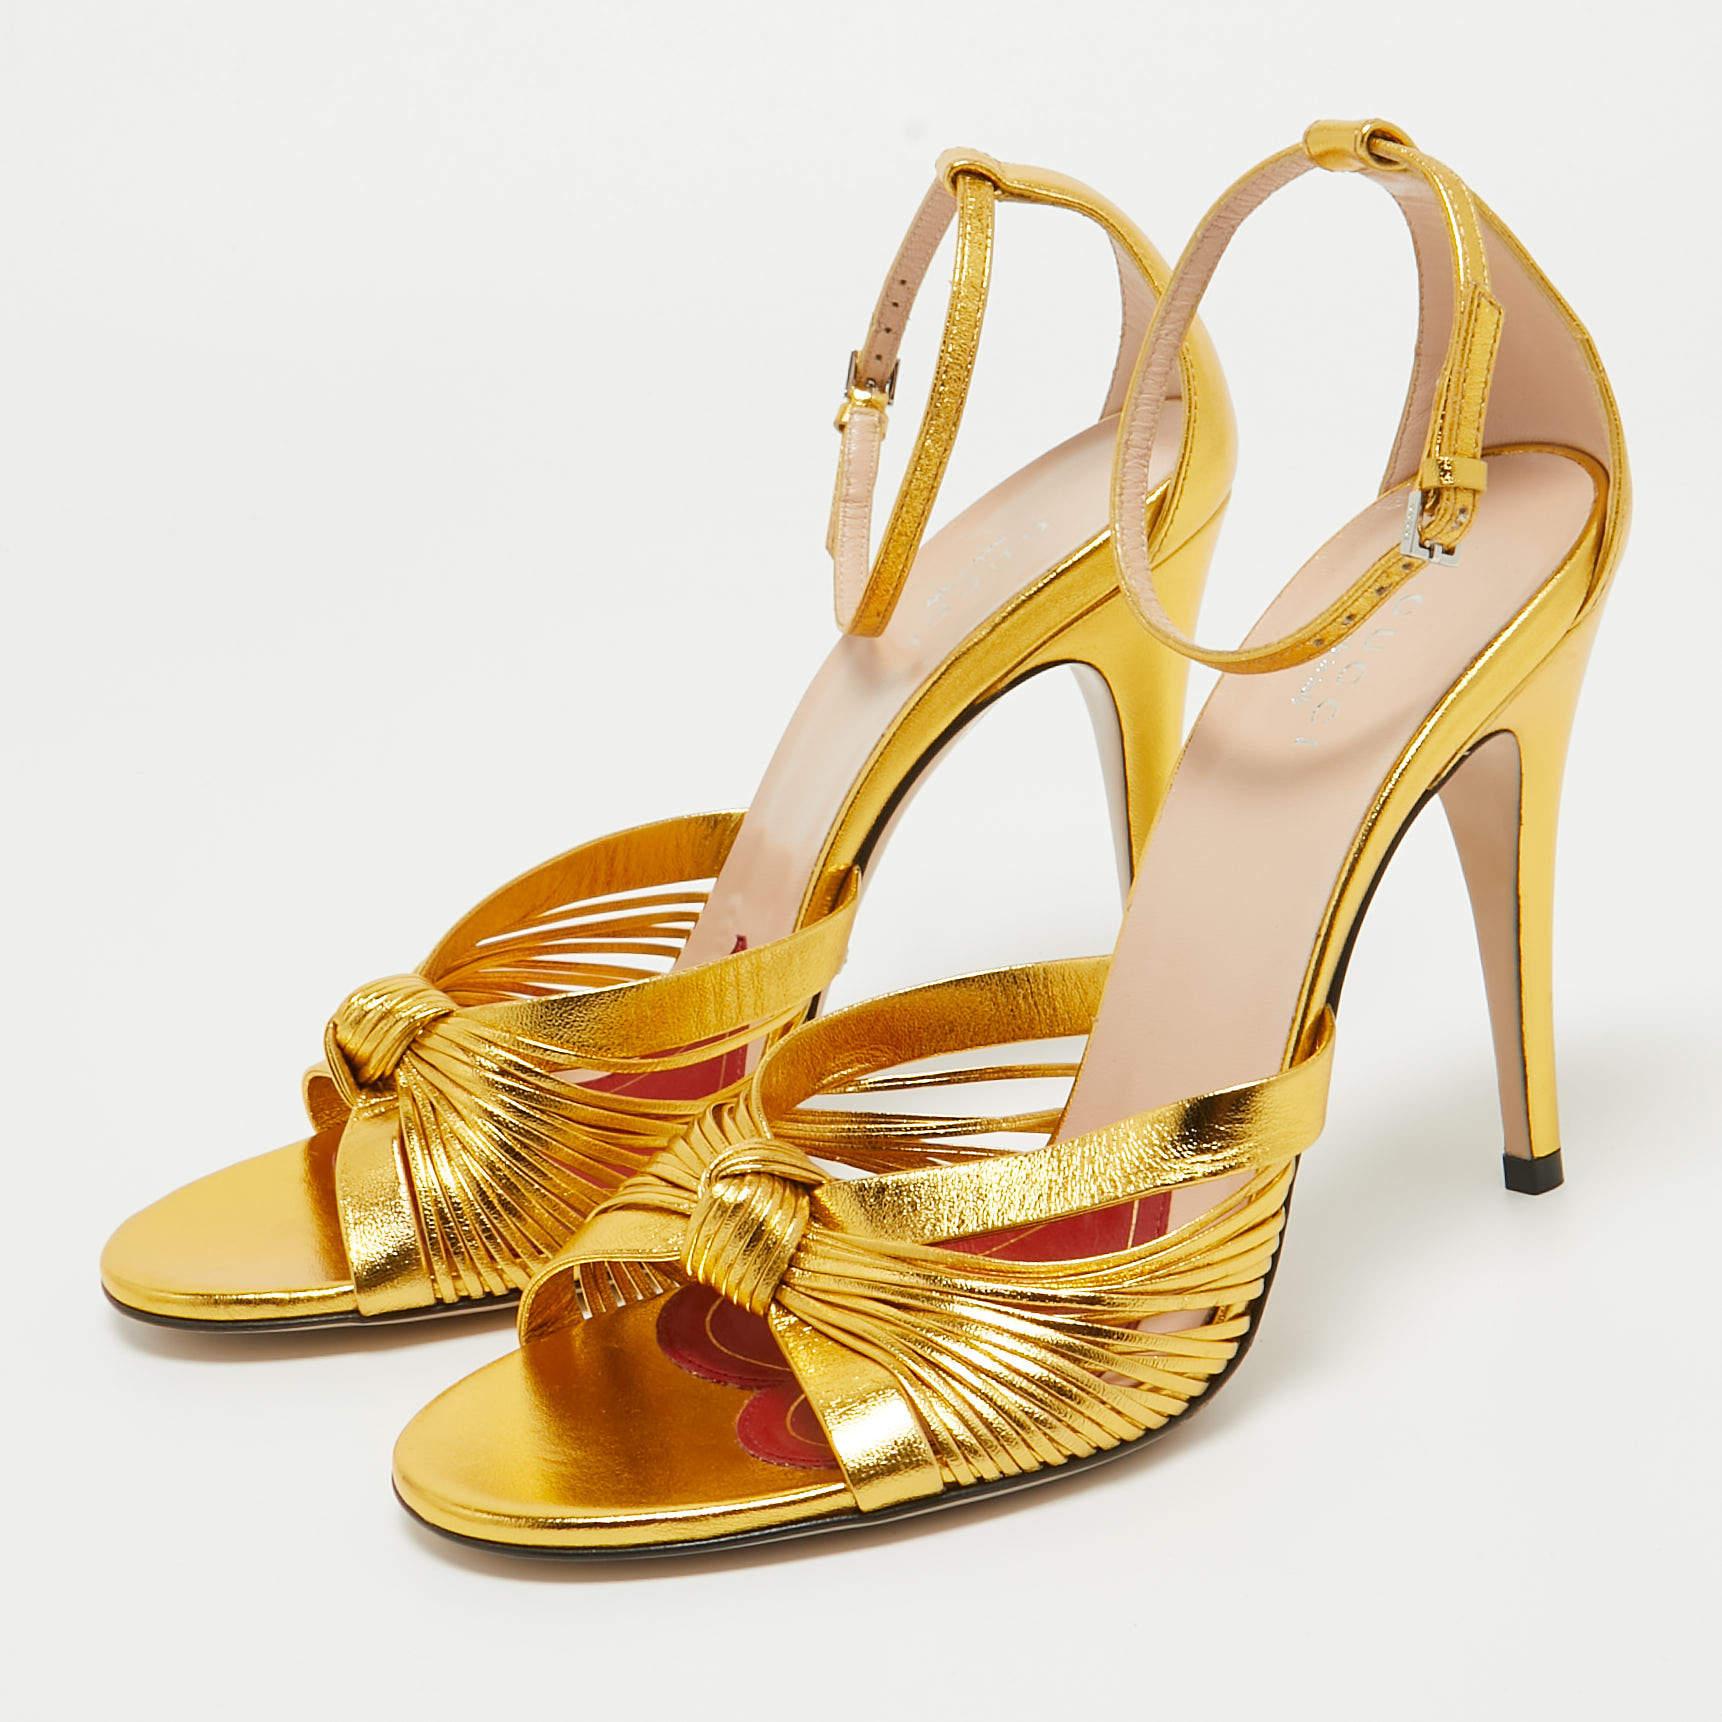 Beauty flows out of these sandals from Gucci! Crafted from metallic gold leather, these sandals have knotted gathering over the toes, open counters with ankle buckle straps and 10 cm heels to help you stand tall.

